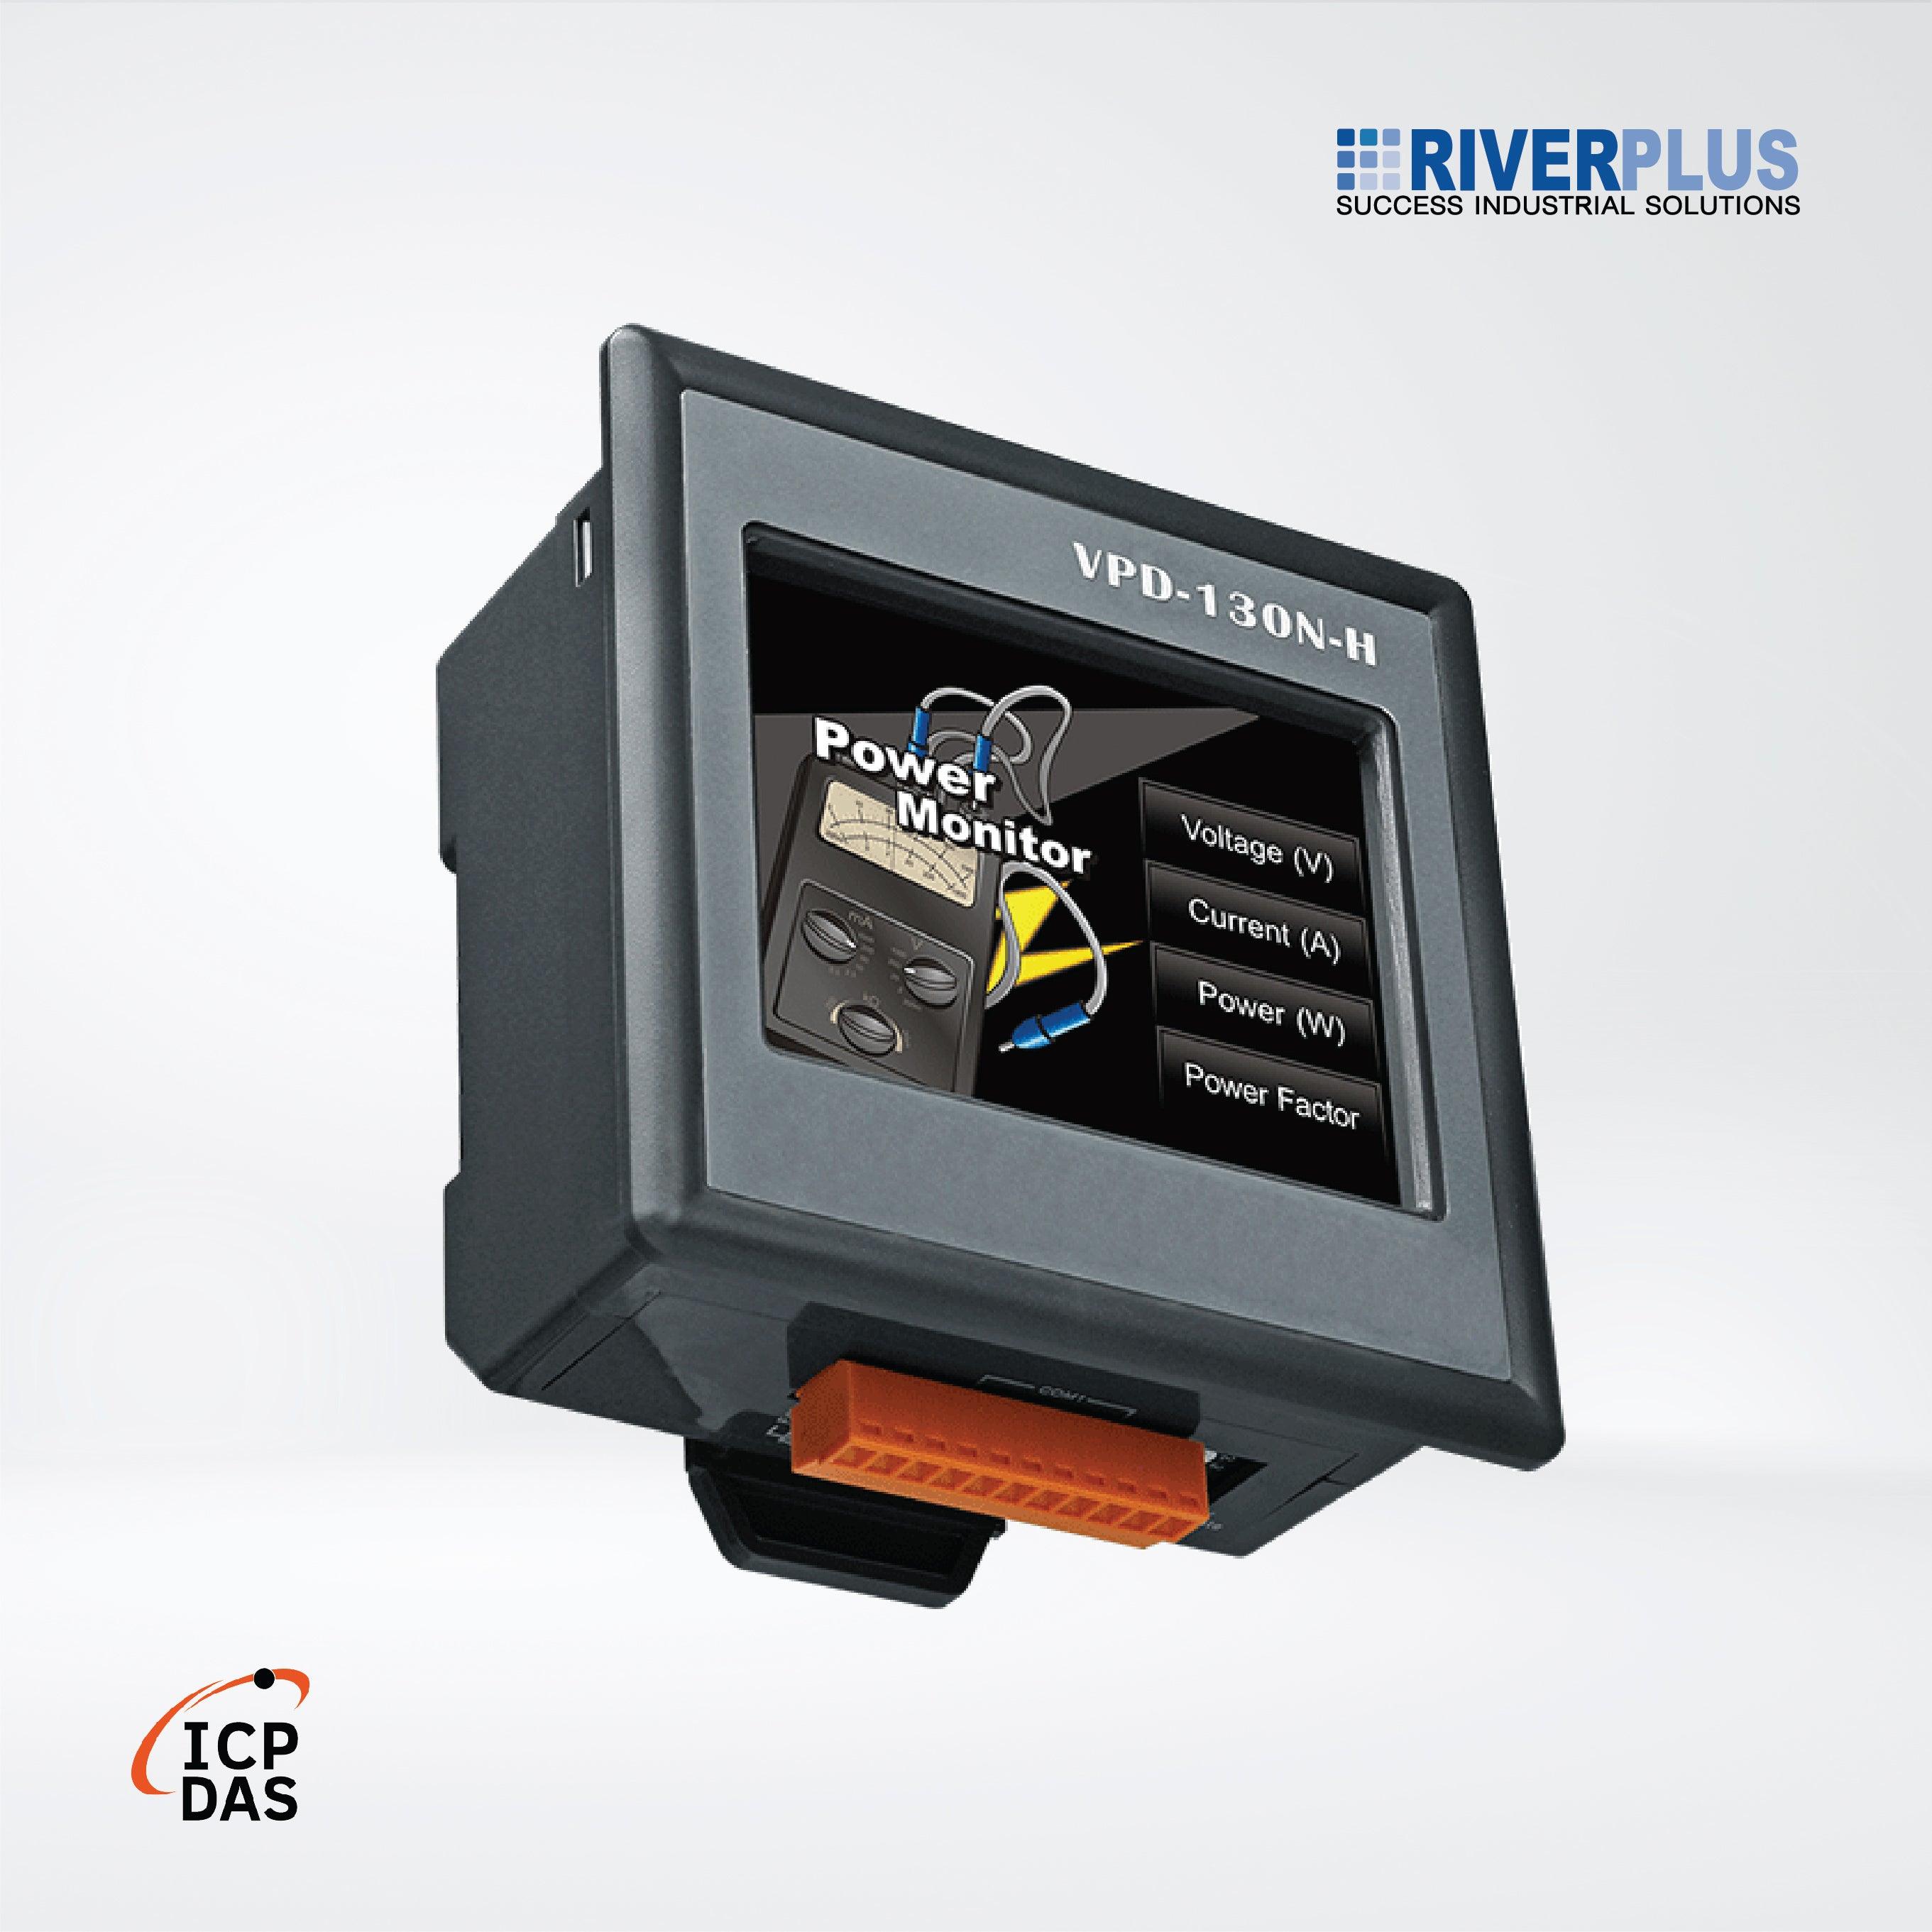 VPD-130N-H 3.5" Touch HMI Device with 1 x RS-232/RS-485 - Riverplus